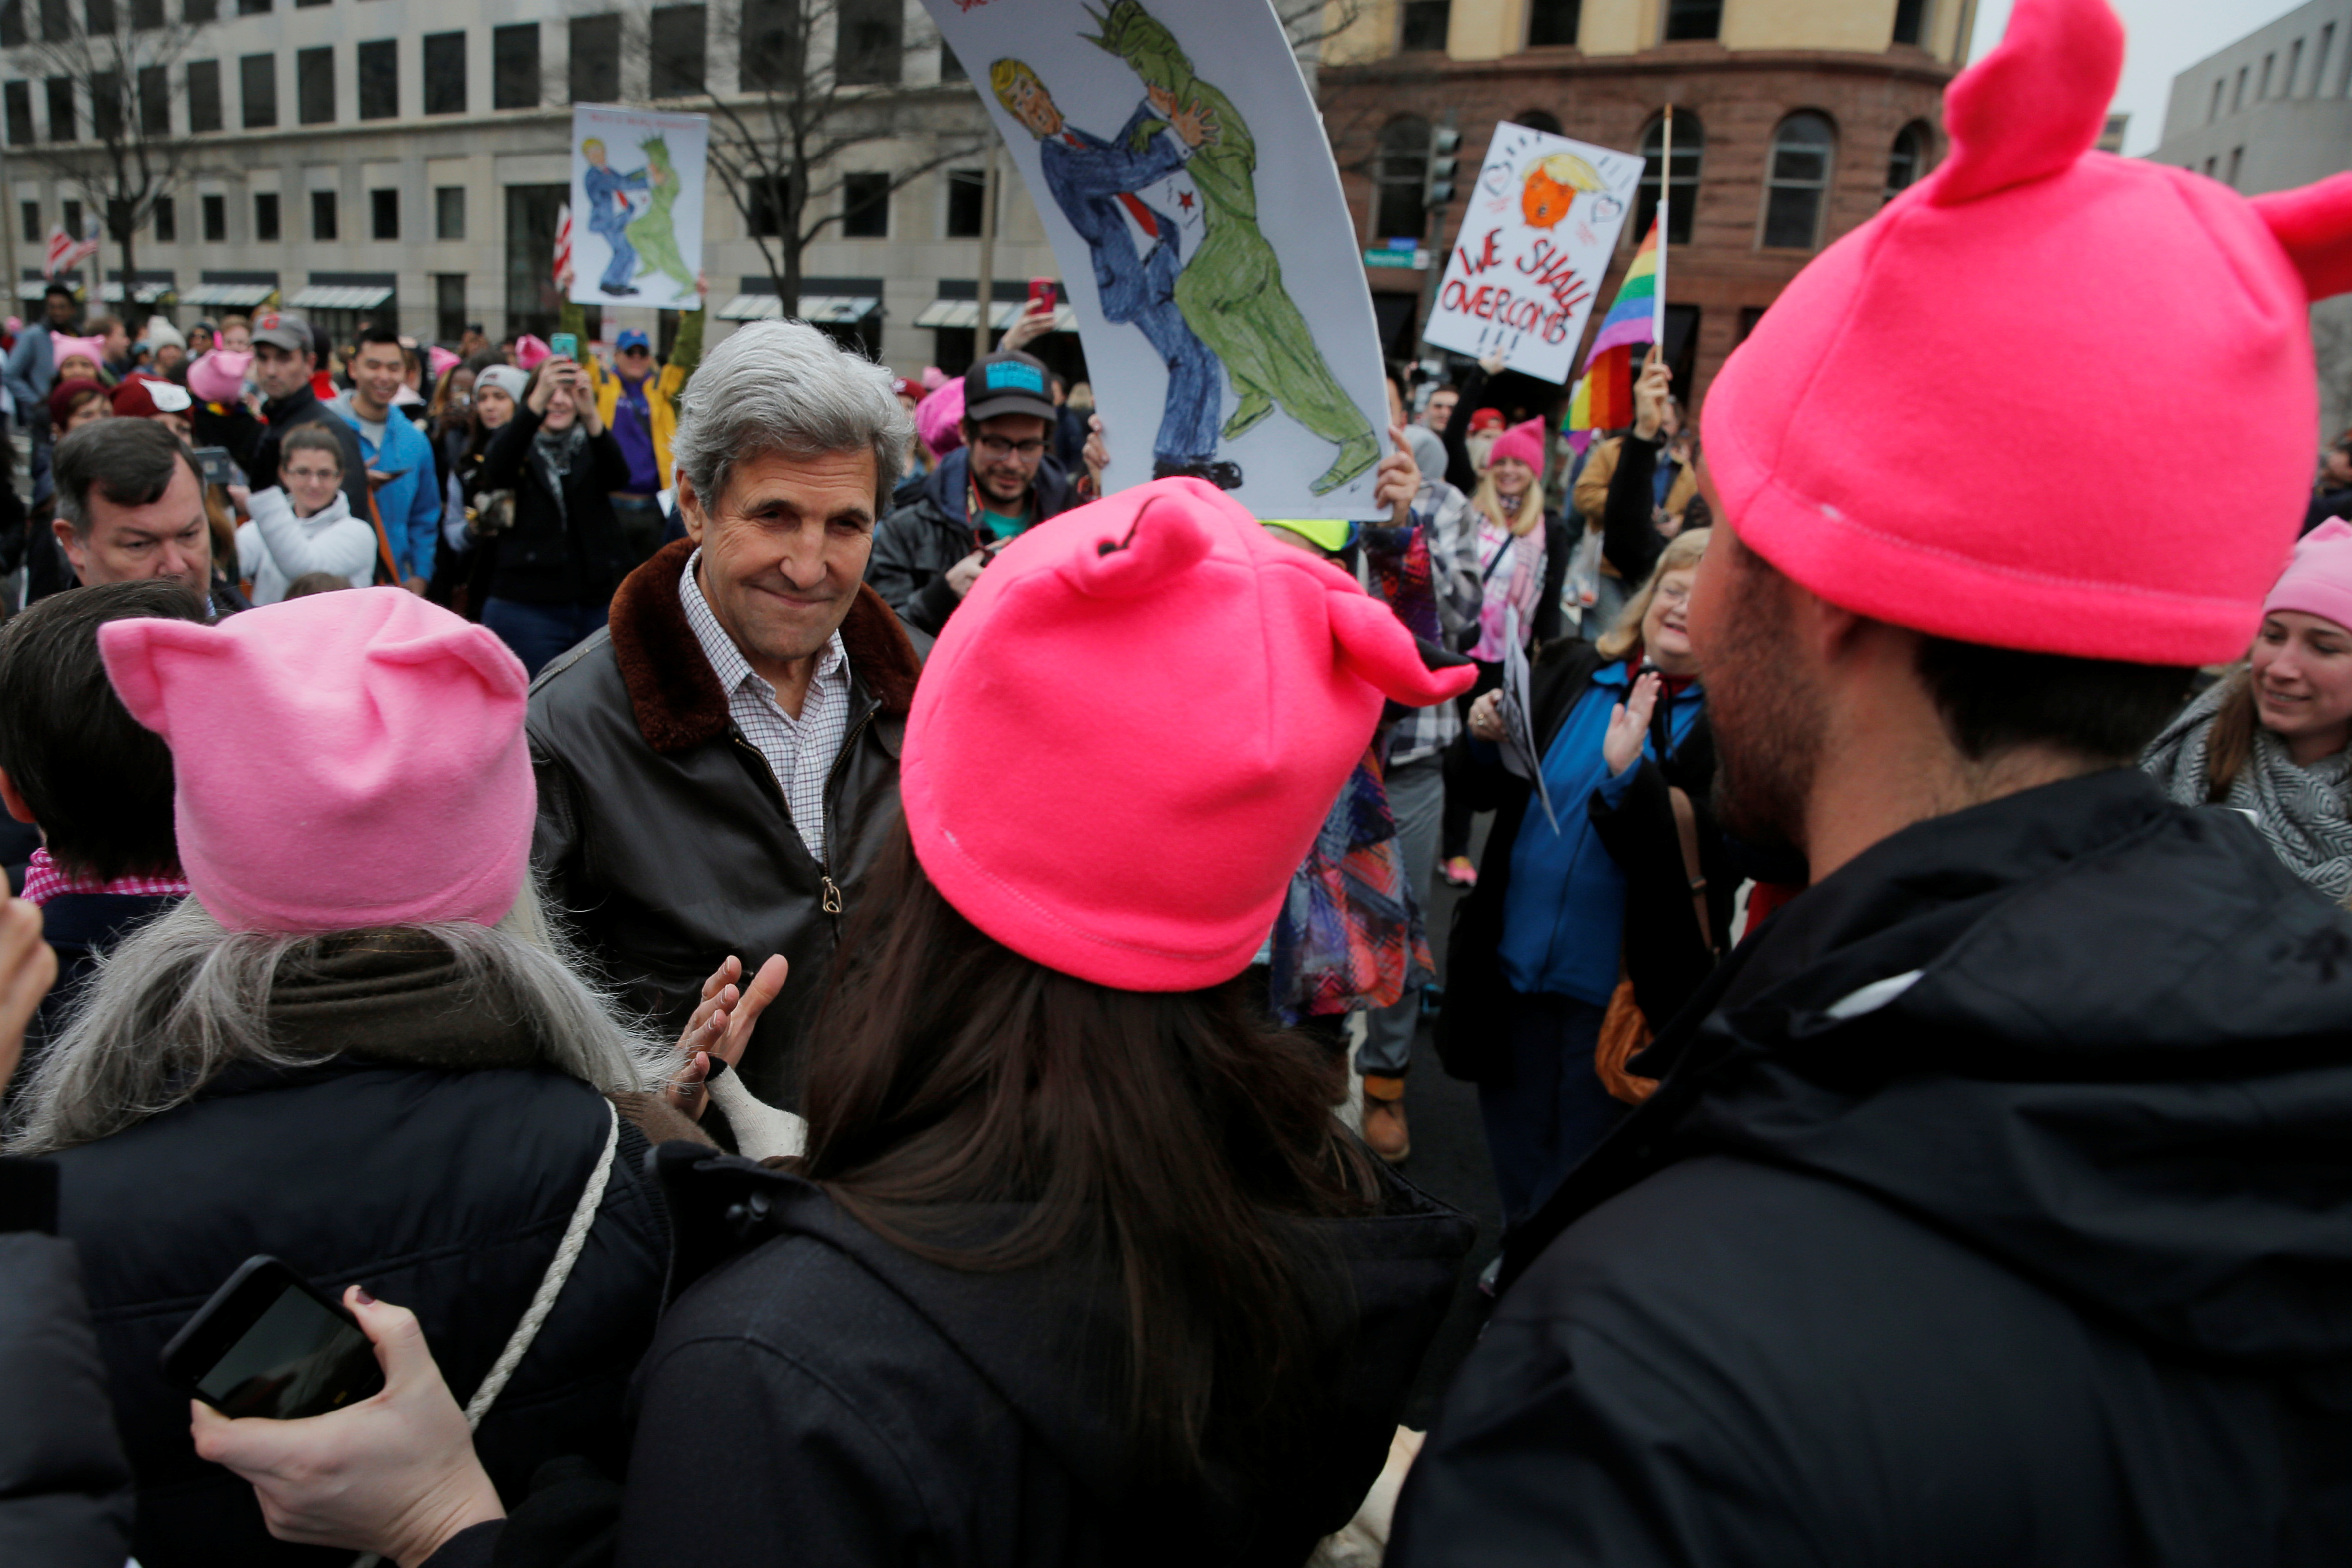 Former U.S. Secretary of State John Kerry walks to join the Women's March on Washington, after the inauguration of U.S. President Donald Trump, in Washington, DC, U.S. January 21, 2017. REUTERS/Brian Snyder